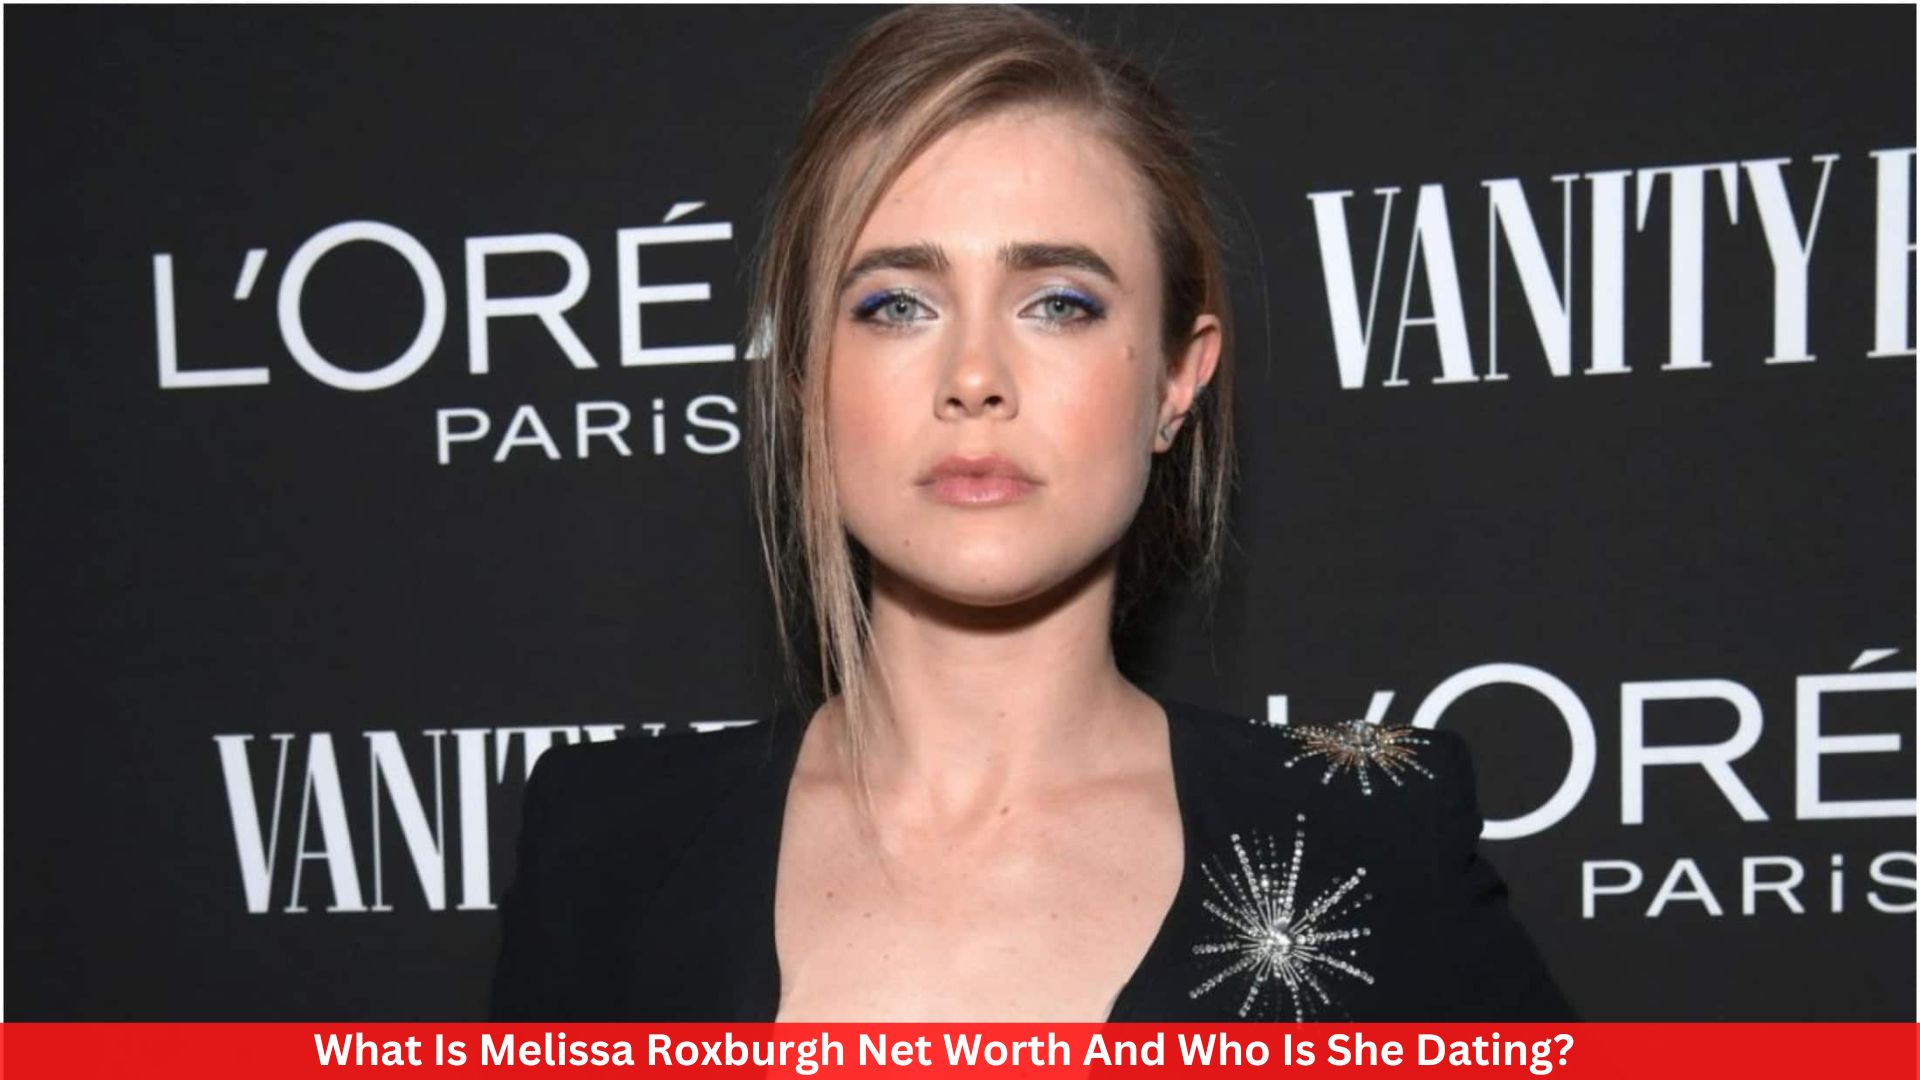 What Is Melissa Roxburgh Net Worth And Who Is She Dating?